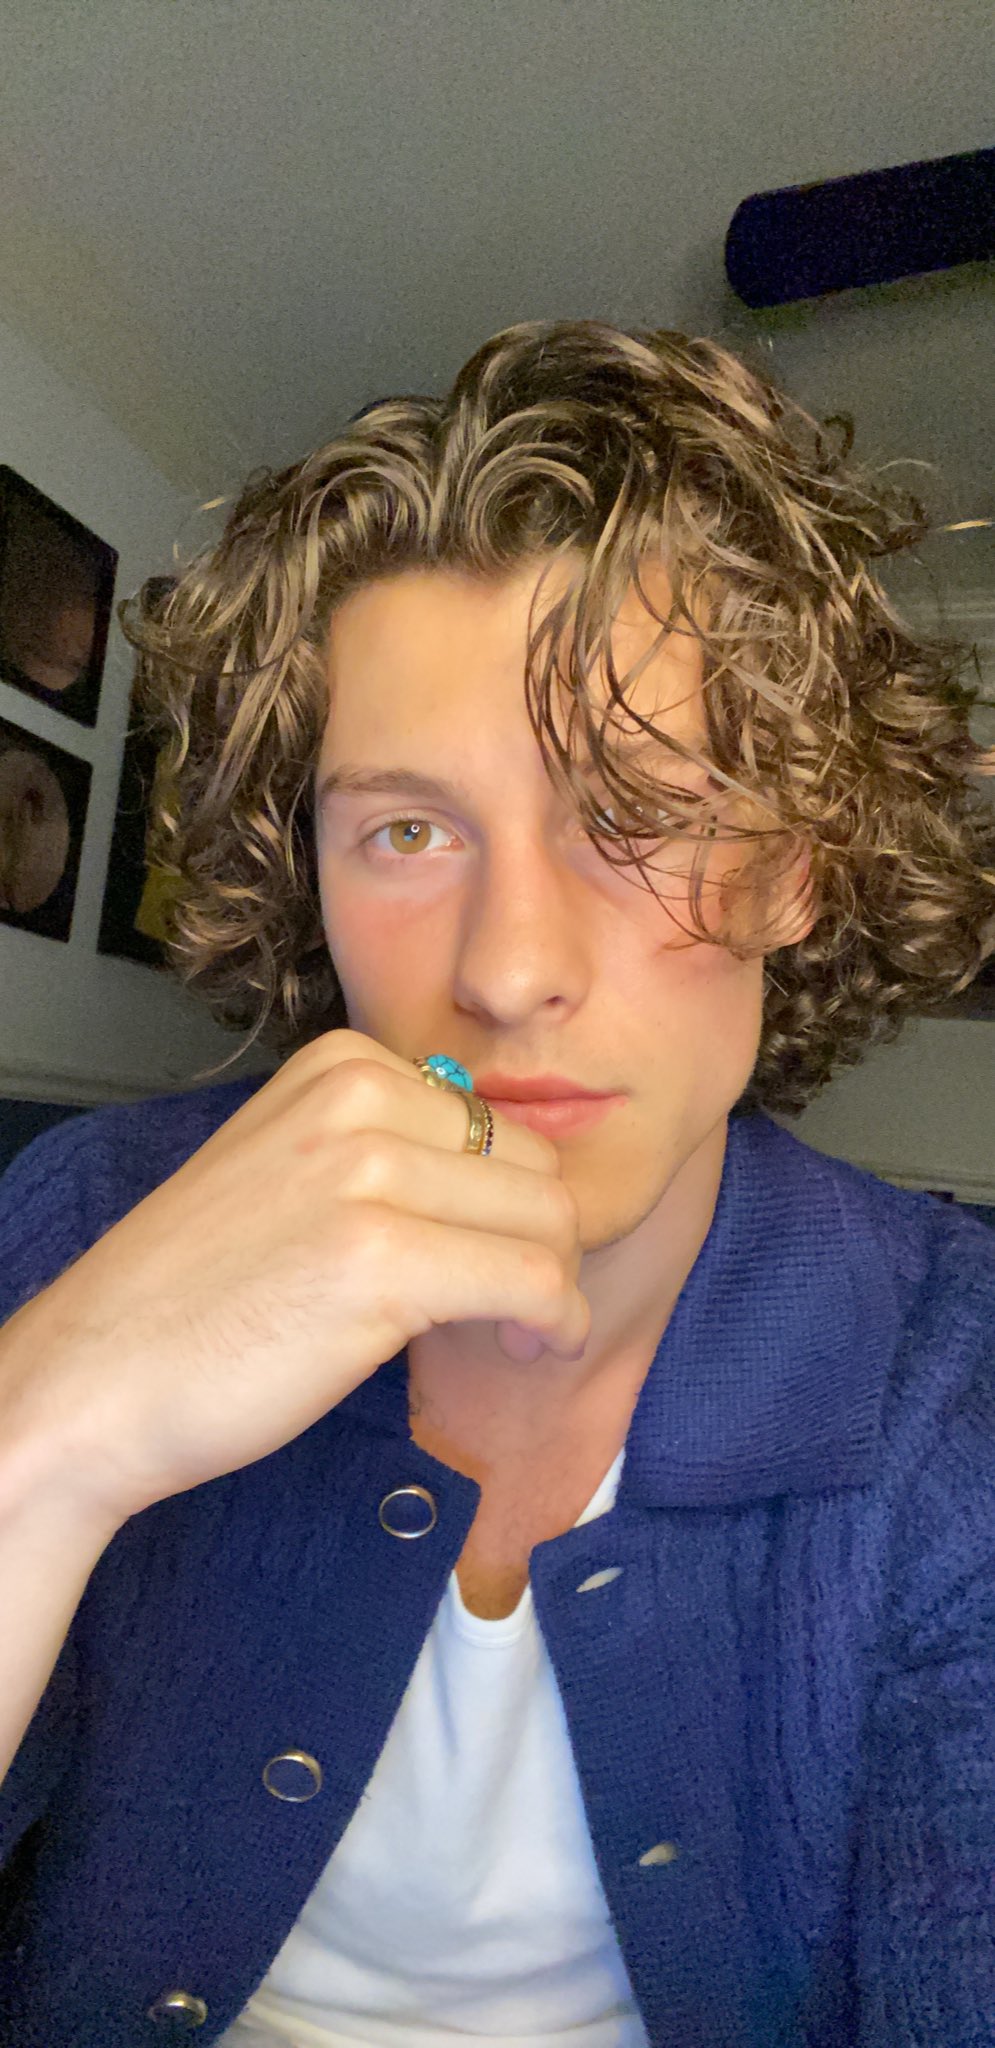 Check Out the Products Shawn Mendes Uses to Get His Iconic Curly Hair